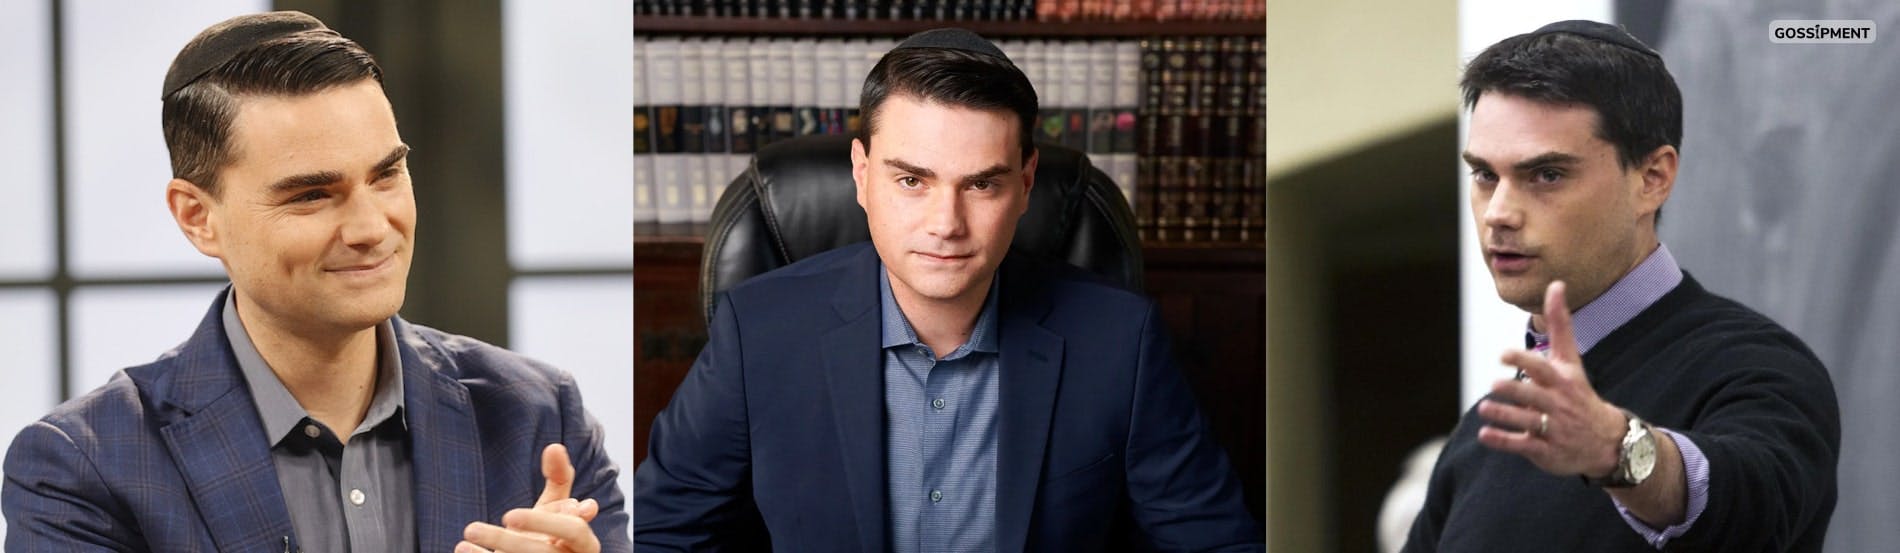 Cover Image for Ben Shapiro Net Worth 2022, Wiki, Age, Height, Wife, Family, Bio